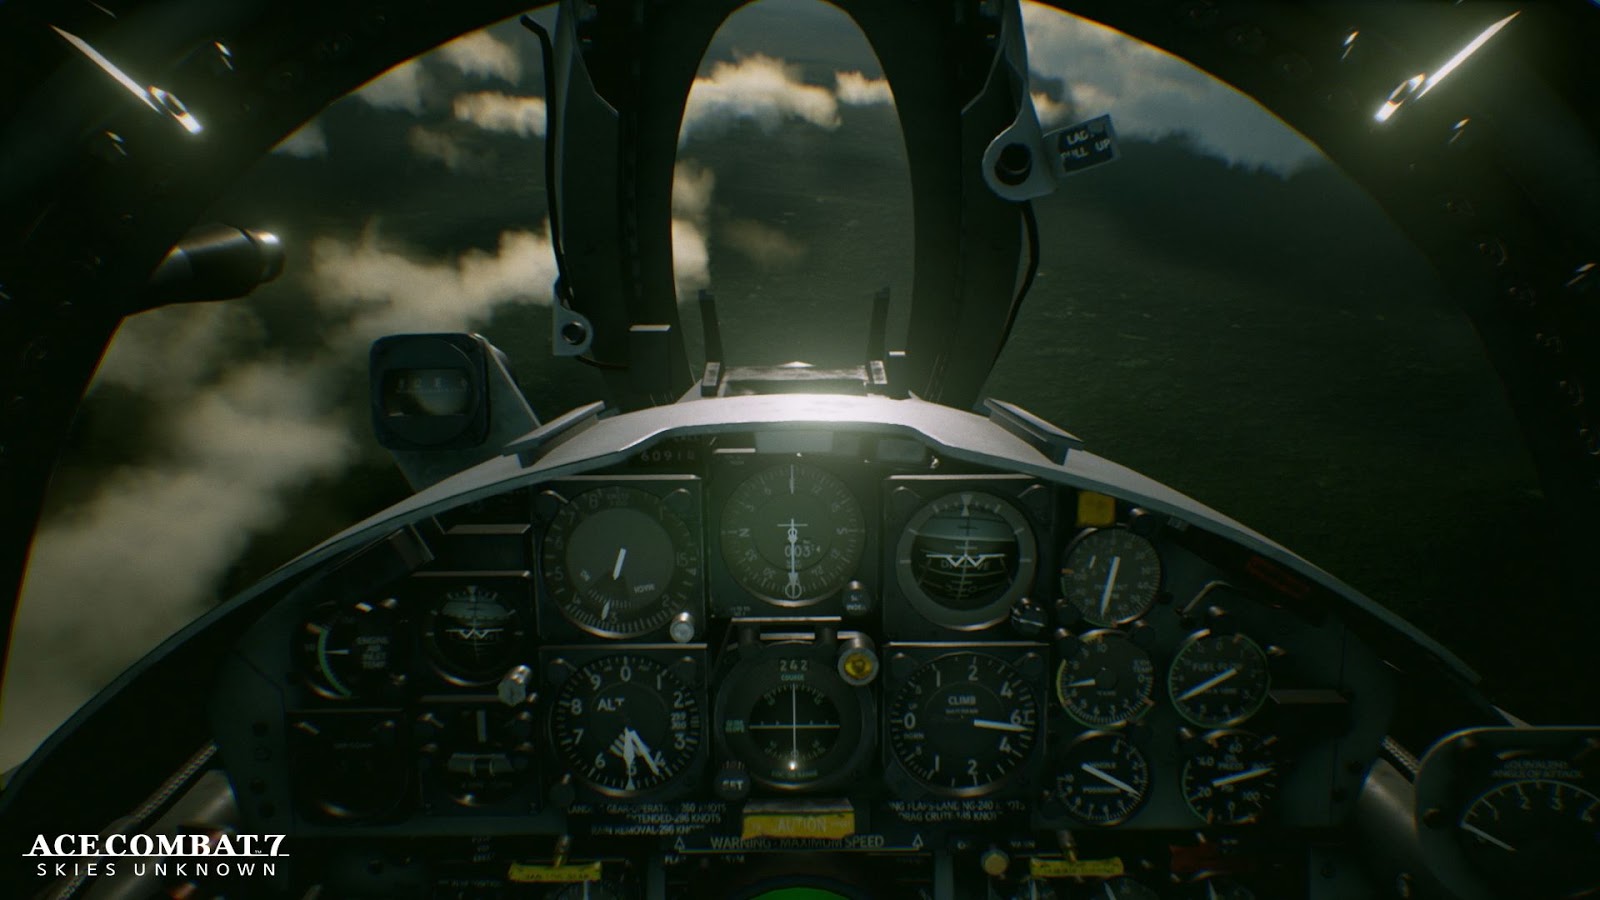 ACE COMBAT 7: SKIES UNKNOWN Trailer and Images | The Entertainment Factor